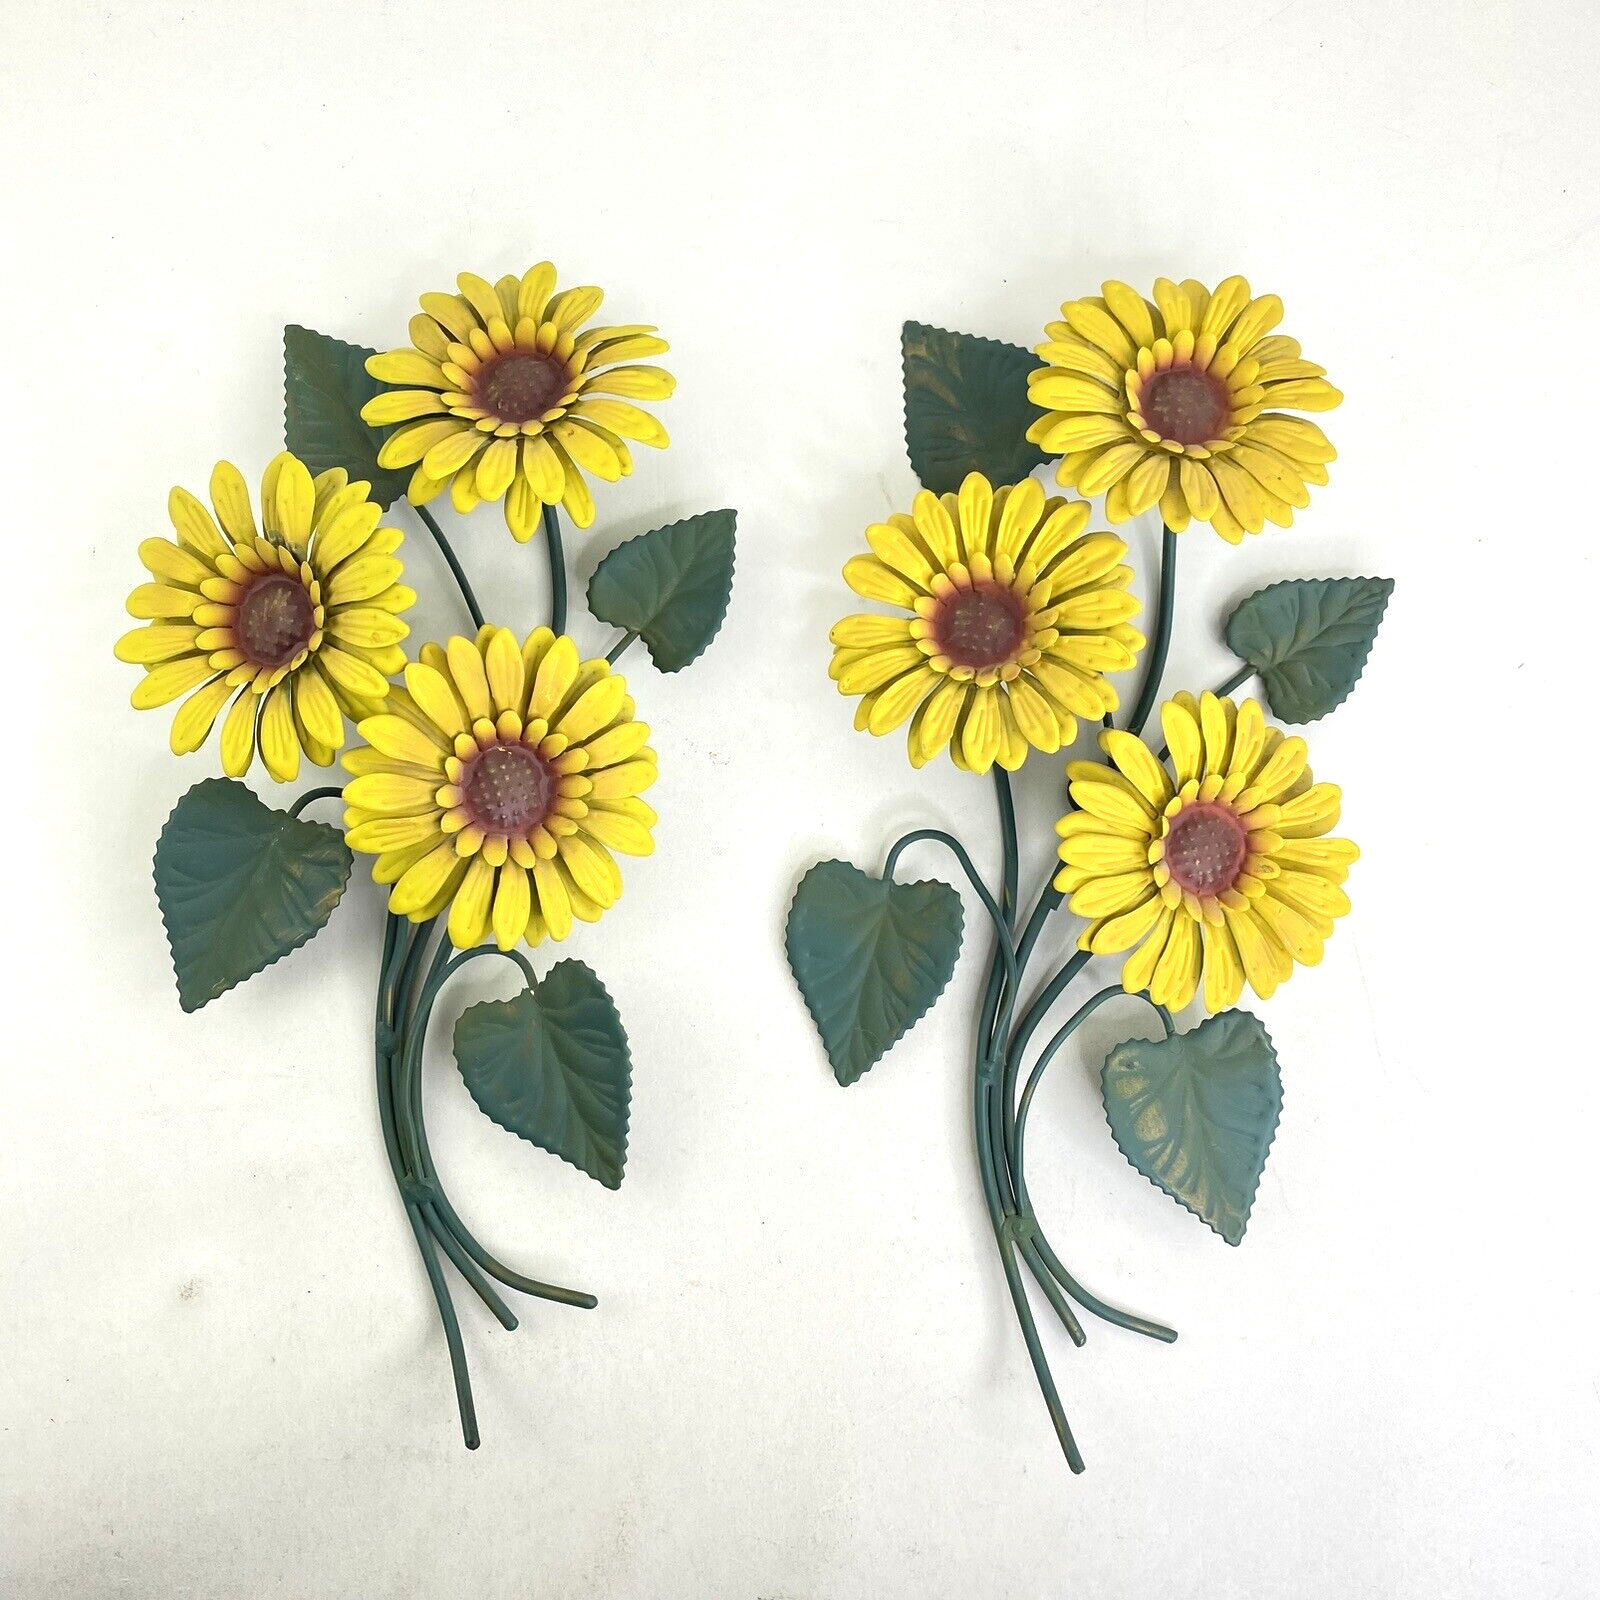 Vintage Metal Sunflowers Painted Wall Hanging Decor 16.5” x 9